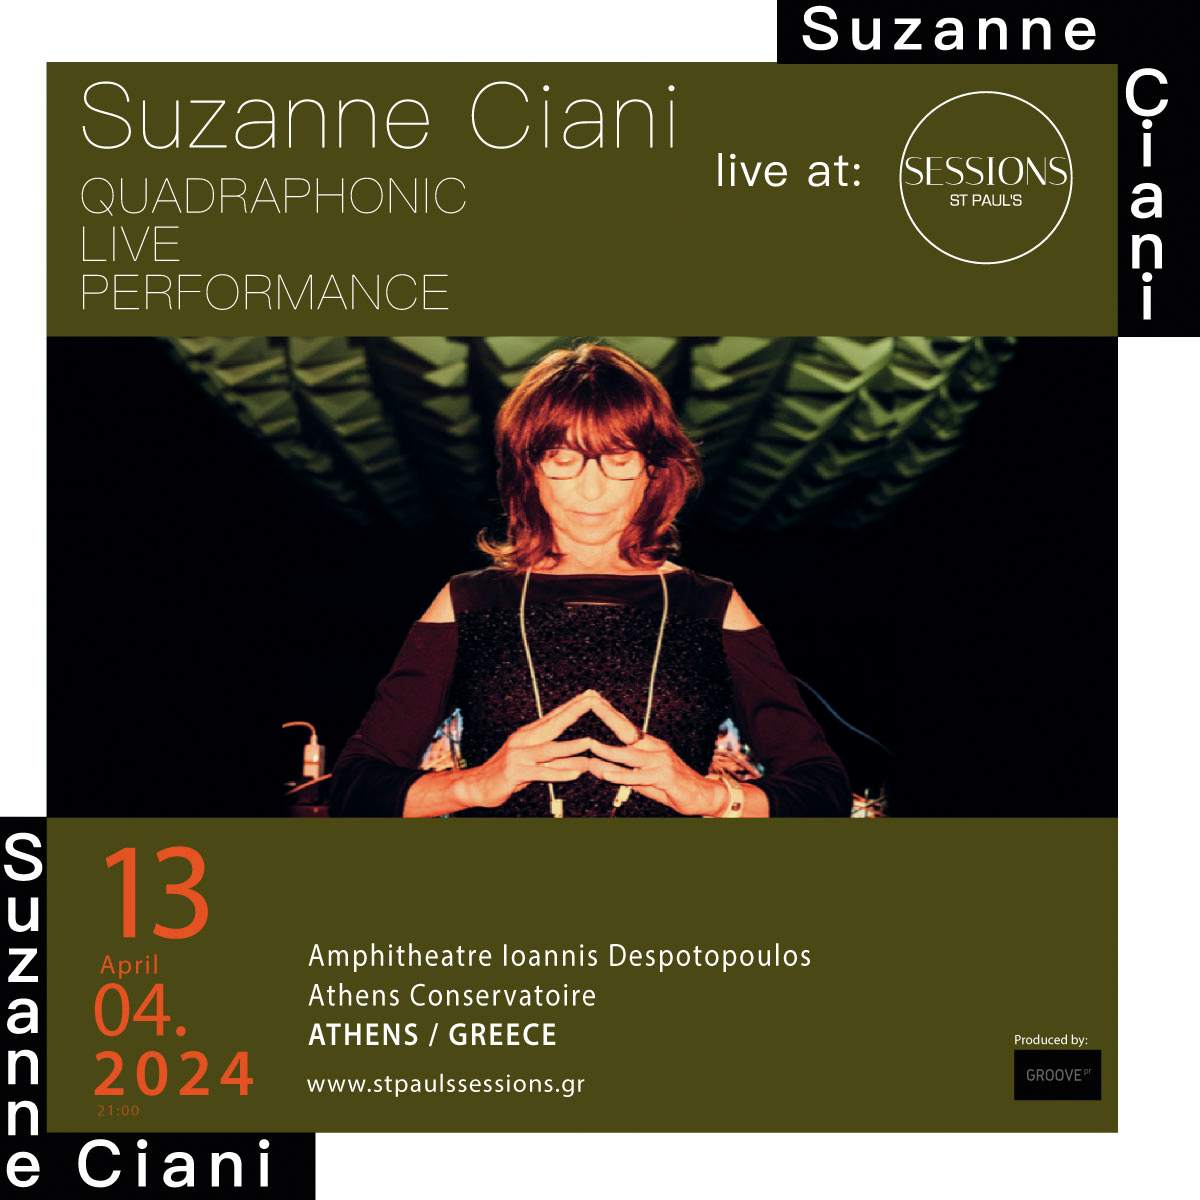 Suzanne Ciani live at St Paul's Sessions 6 - フライヤー表